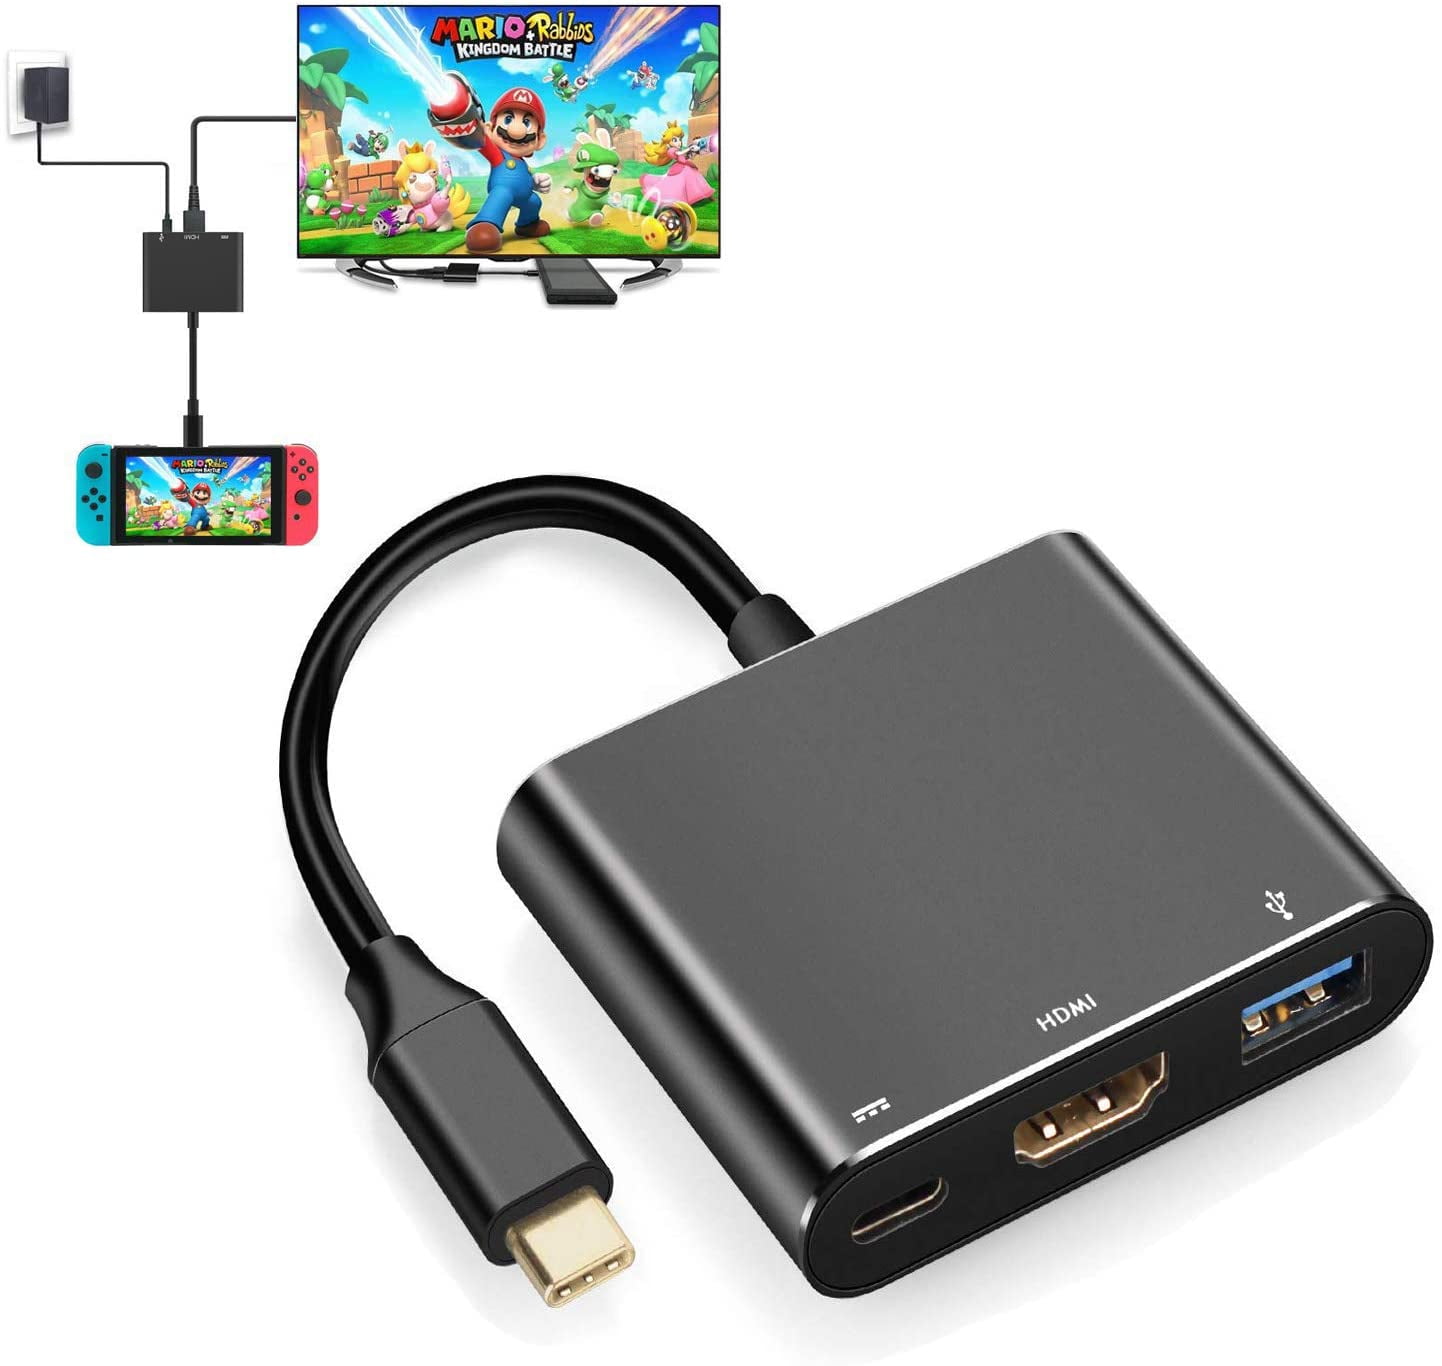 Adapter for Nintendo Switch, USB-C Charging Cable Switch Hdmi Adapter Support Any Type C Device Hub Adapter for Nintendo Switch - Walmart.com